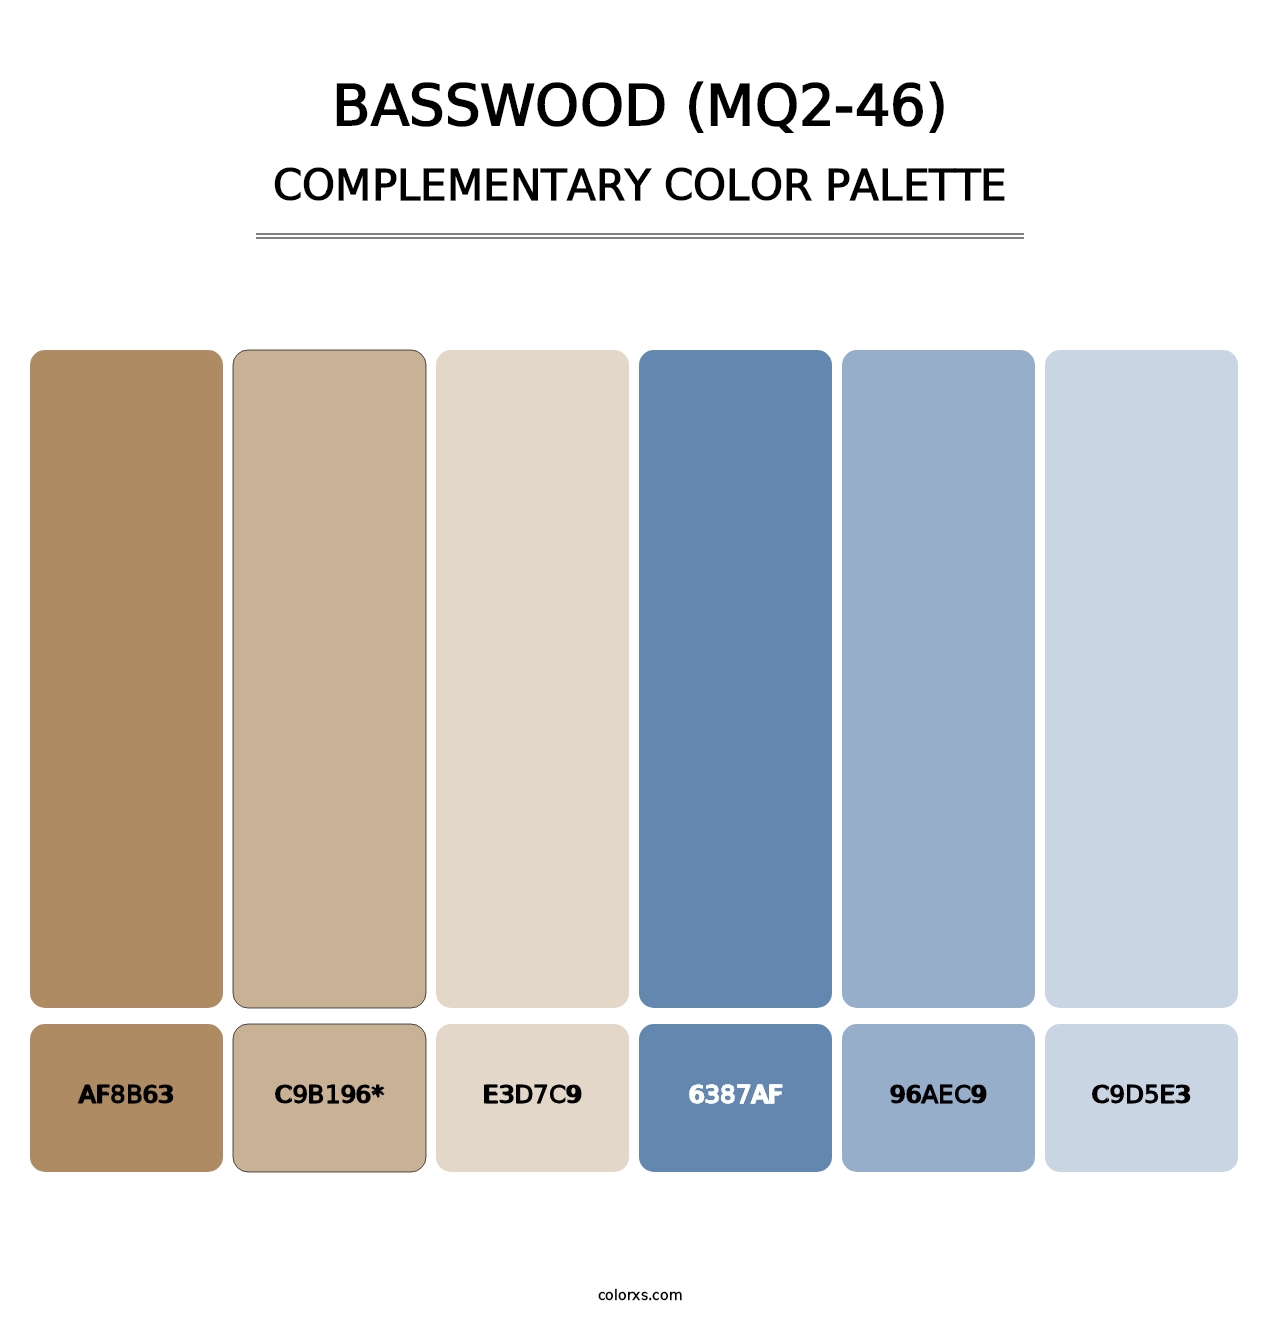 Basswood (MQ2-46) - Complementary Color Palette